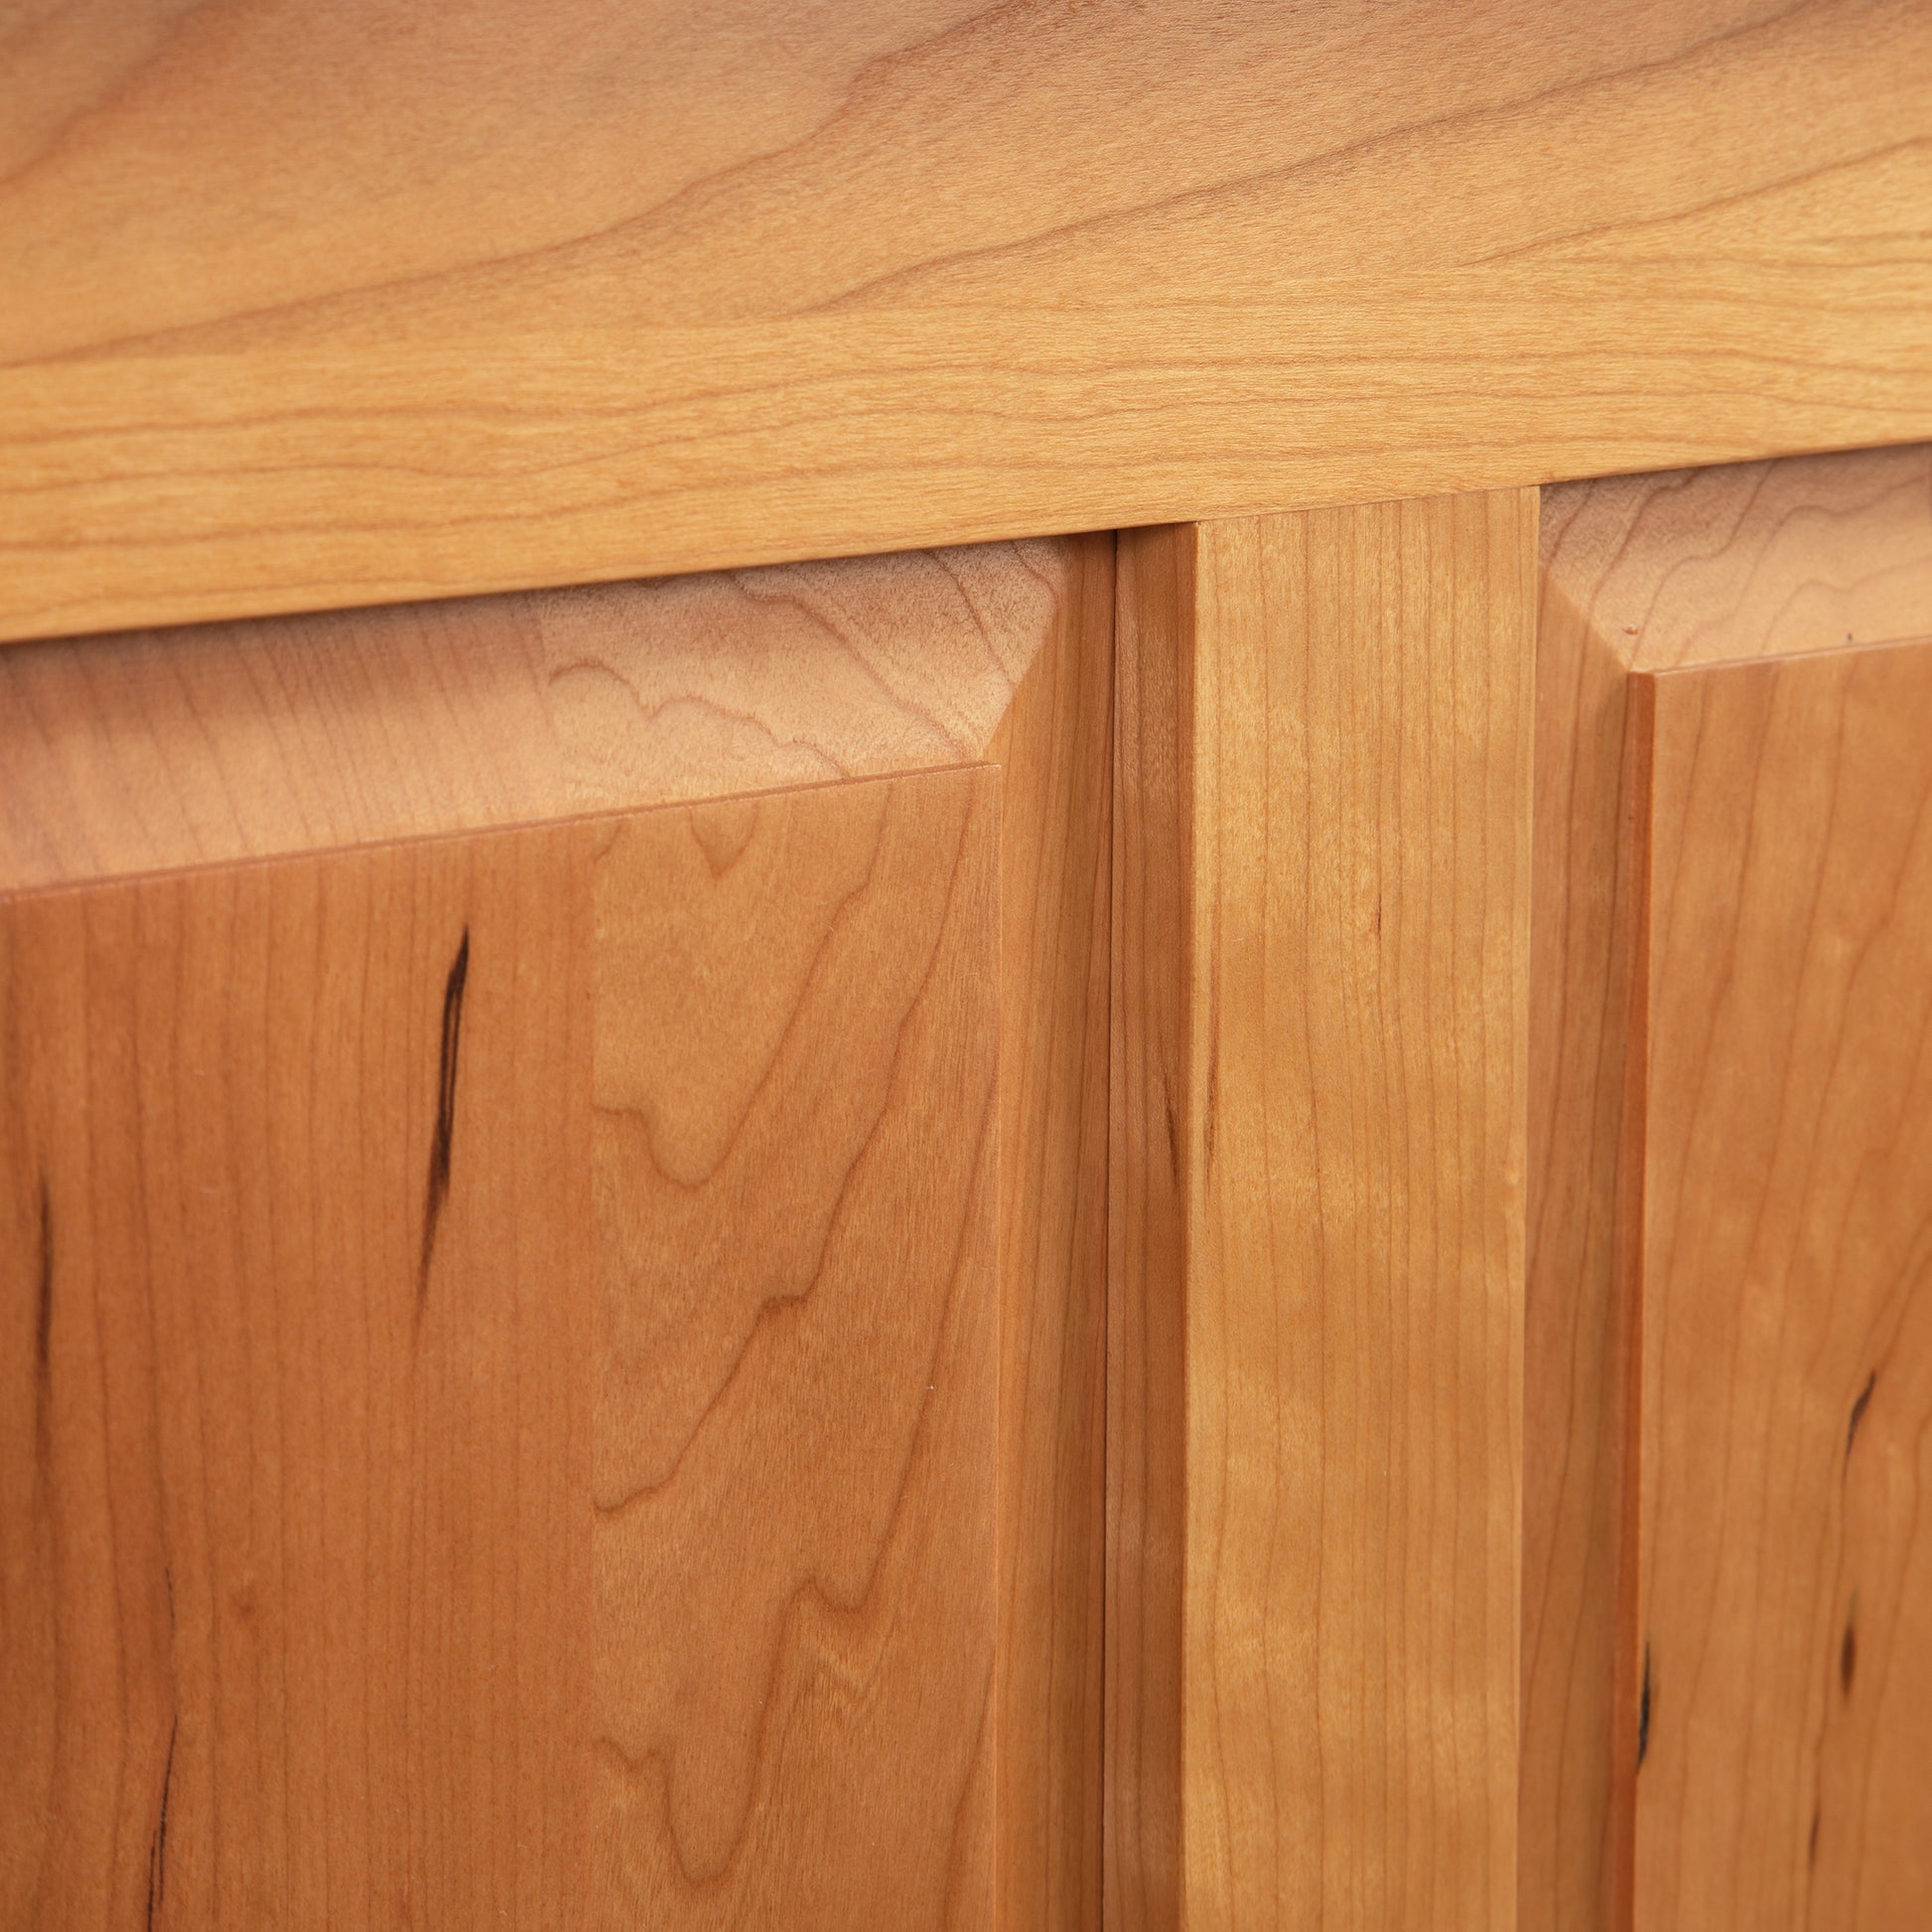 A close up of a wooden cabinet door.